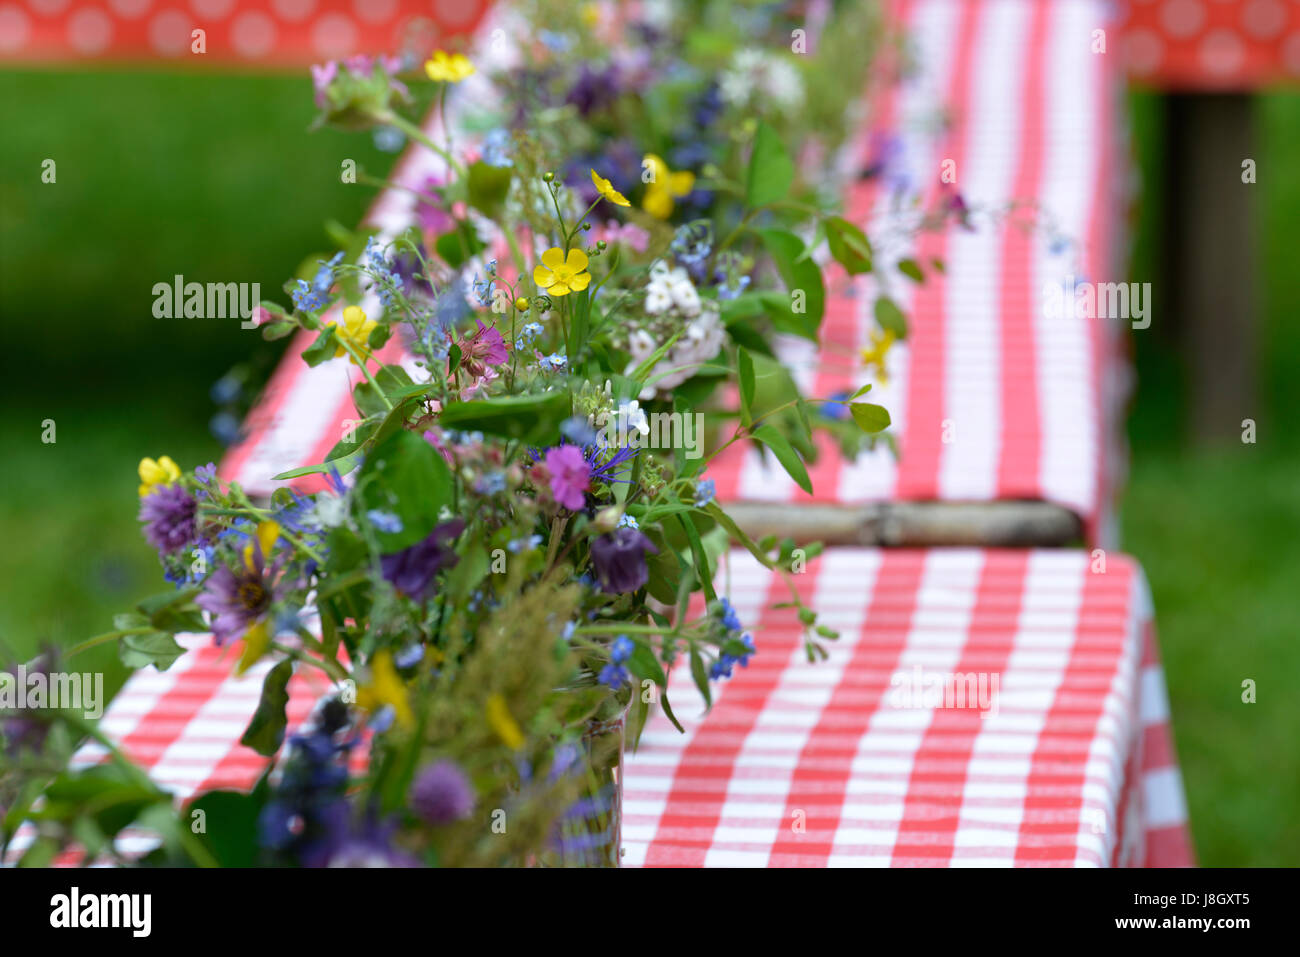 A row of cute little summer bouquets in glass jars standing on top of a couple of tables, decorated with red and white table cloths. Stock Photo